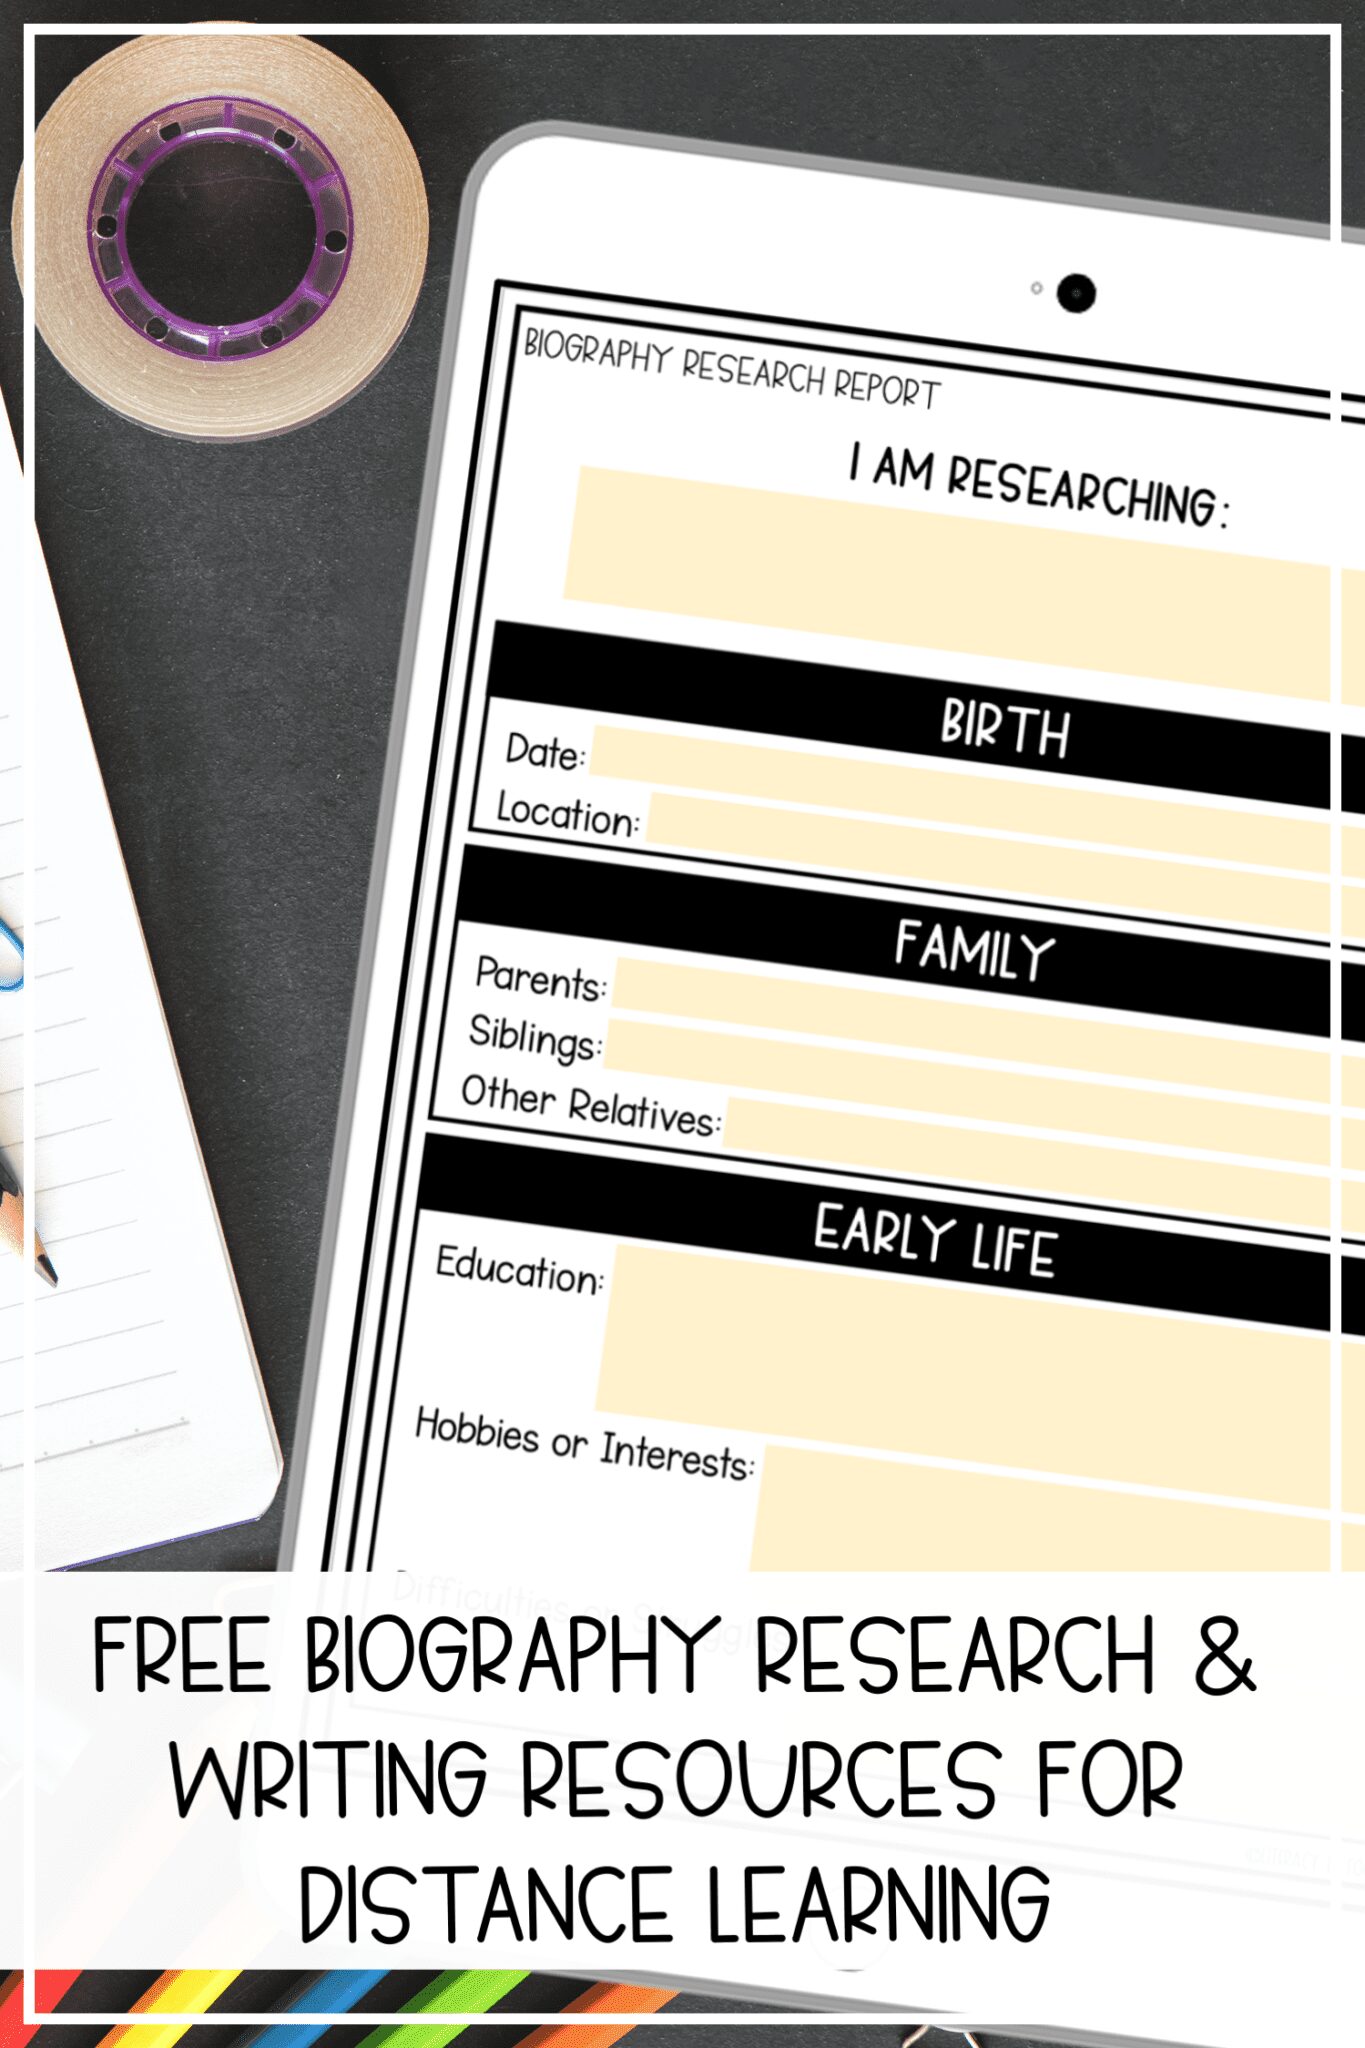 Free Biography Report Template and Resources for Distance Learning